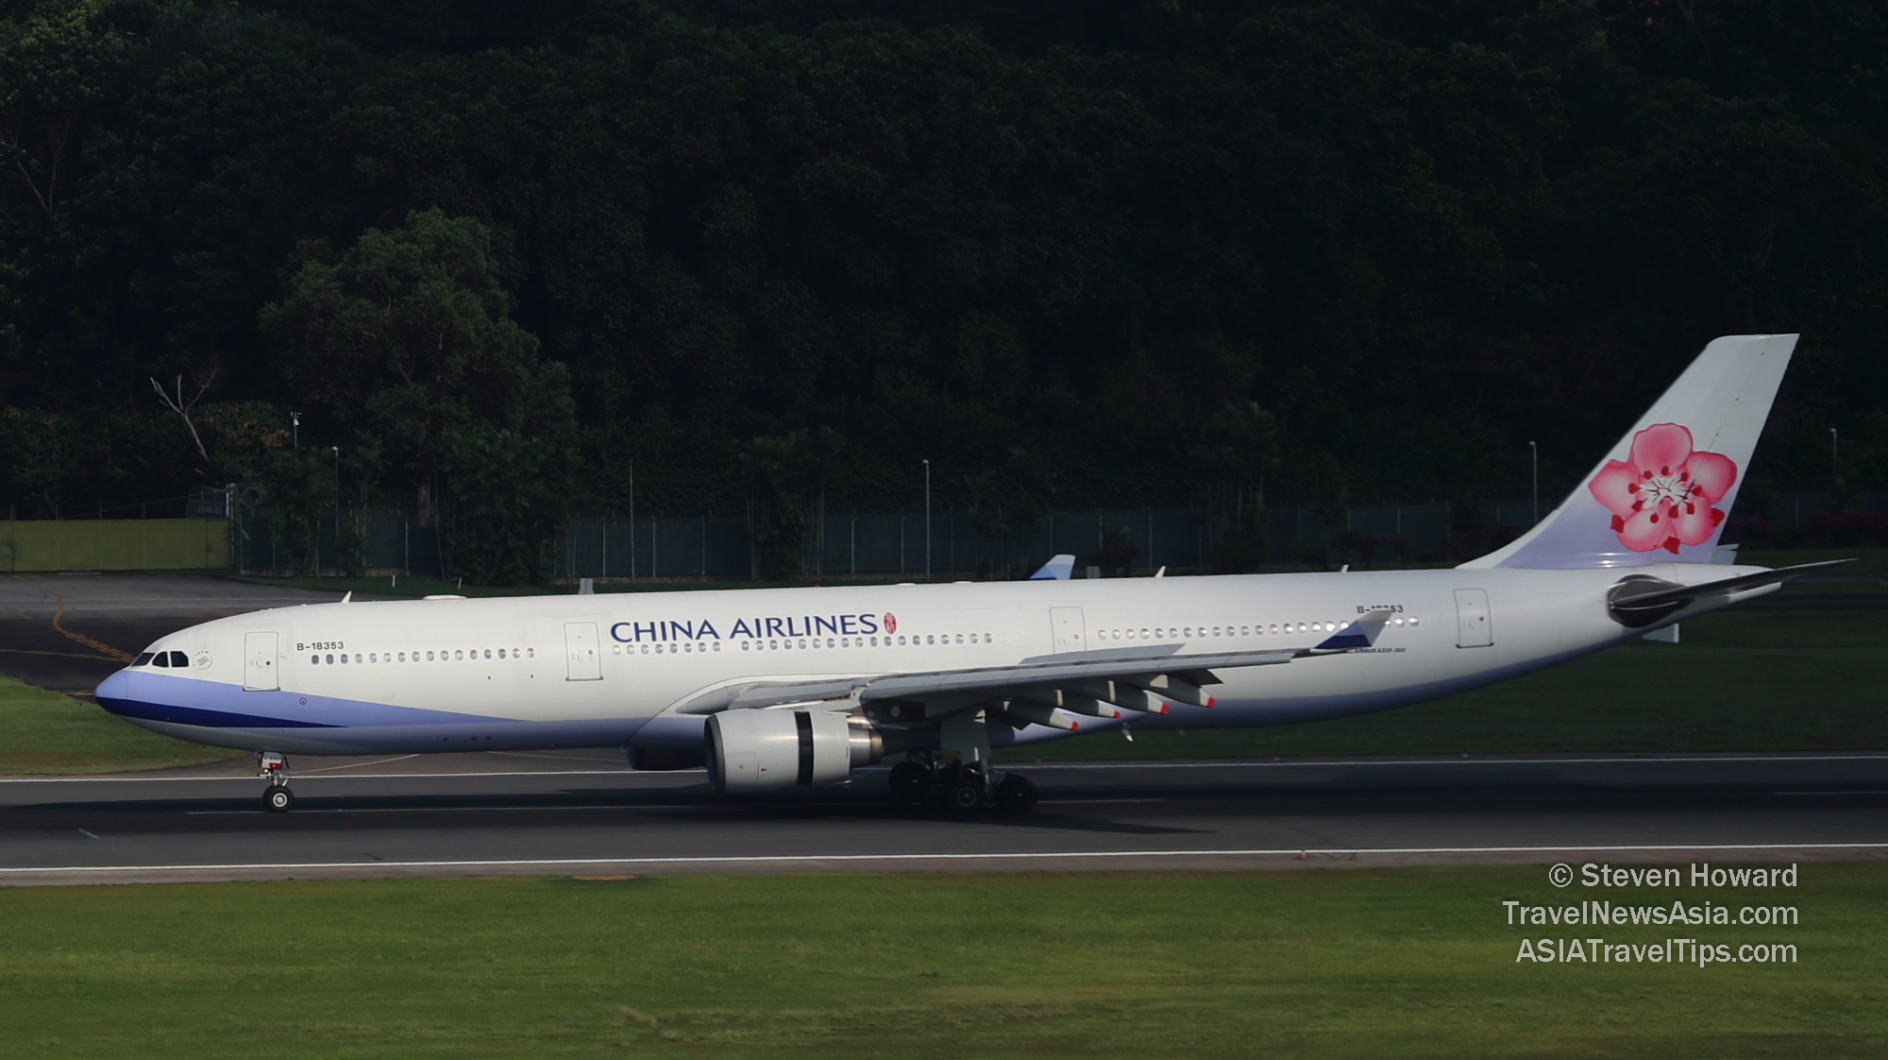 China Airlines A330 reg: B-18353. Picture by Steven Howard of TravelNewsAsia.com Click to enlarge.